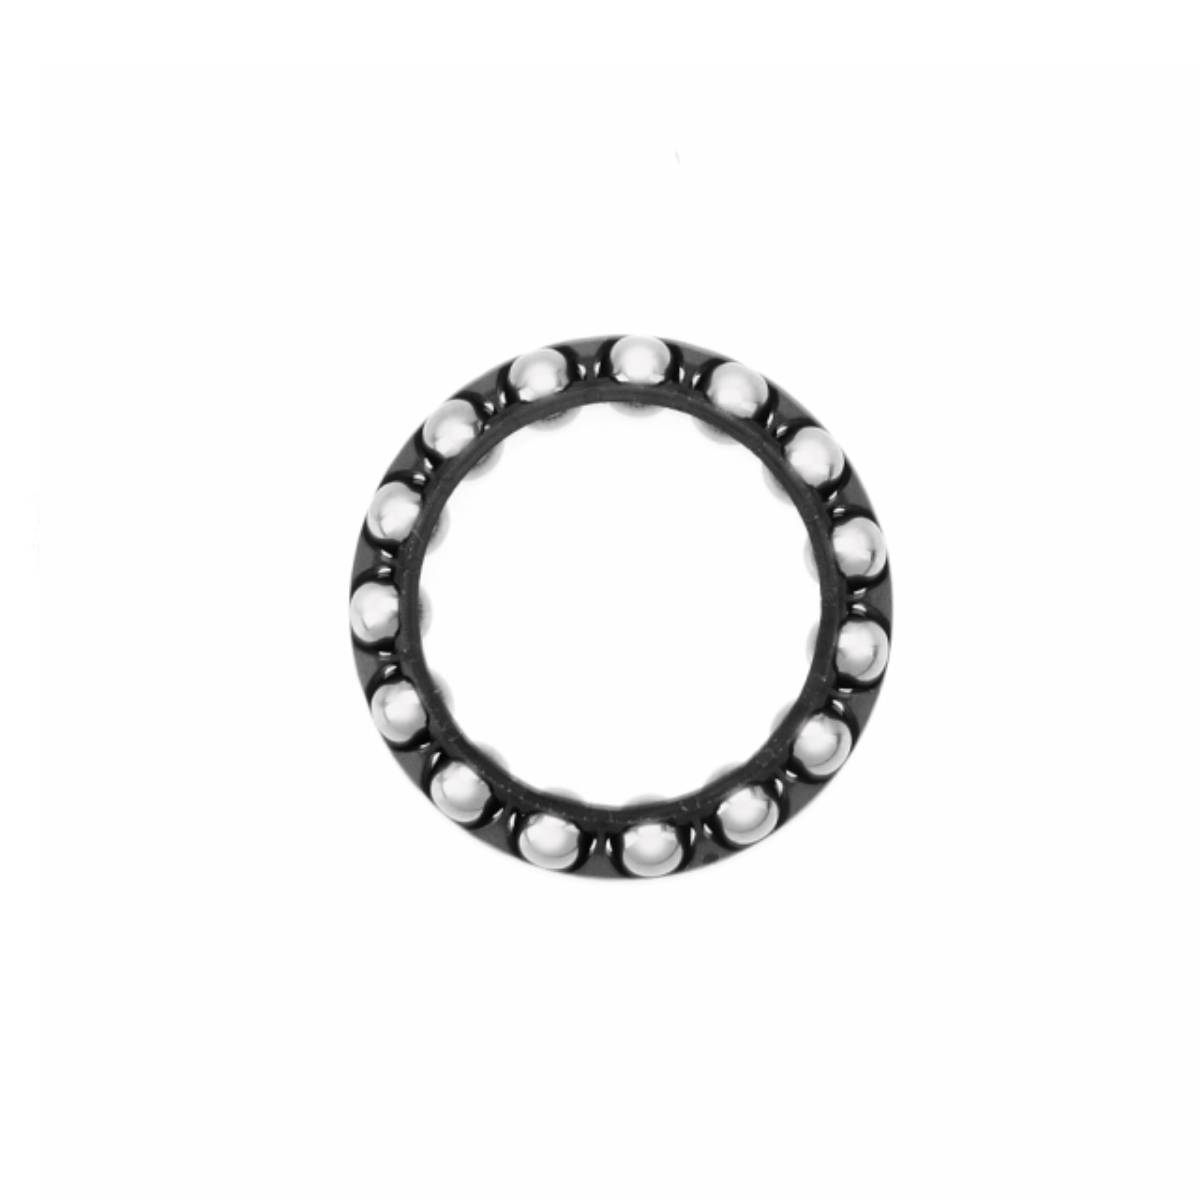 WH-RS170-CL-F12 BALL RETAINER (5/32"X15)